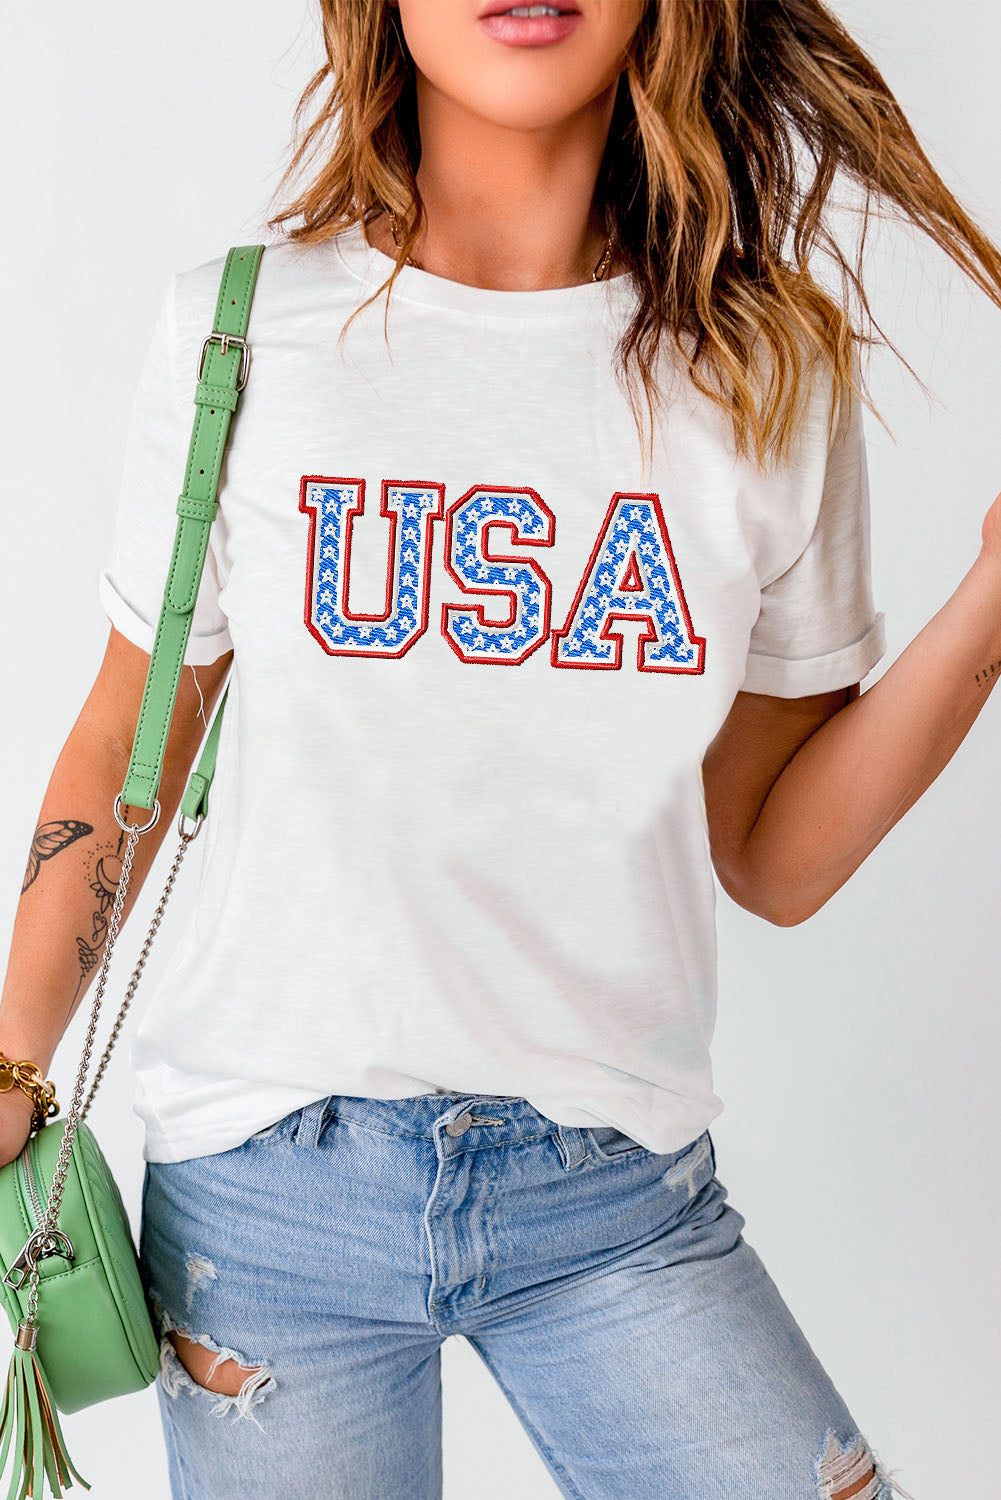 Show off your USA pride with this comfy, stylish round neck tee. Perfect for casual wear and national holidays. Durable and easy to pair.